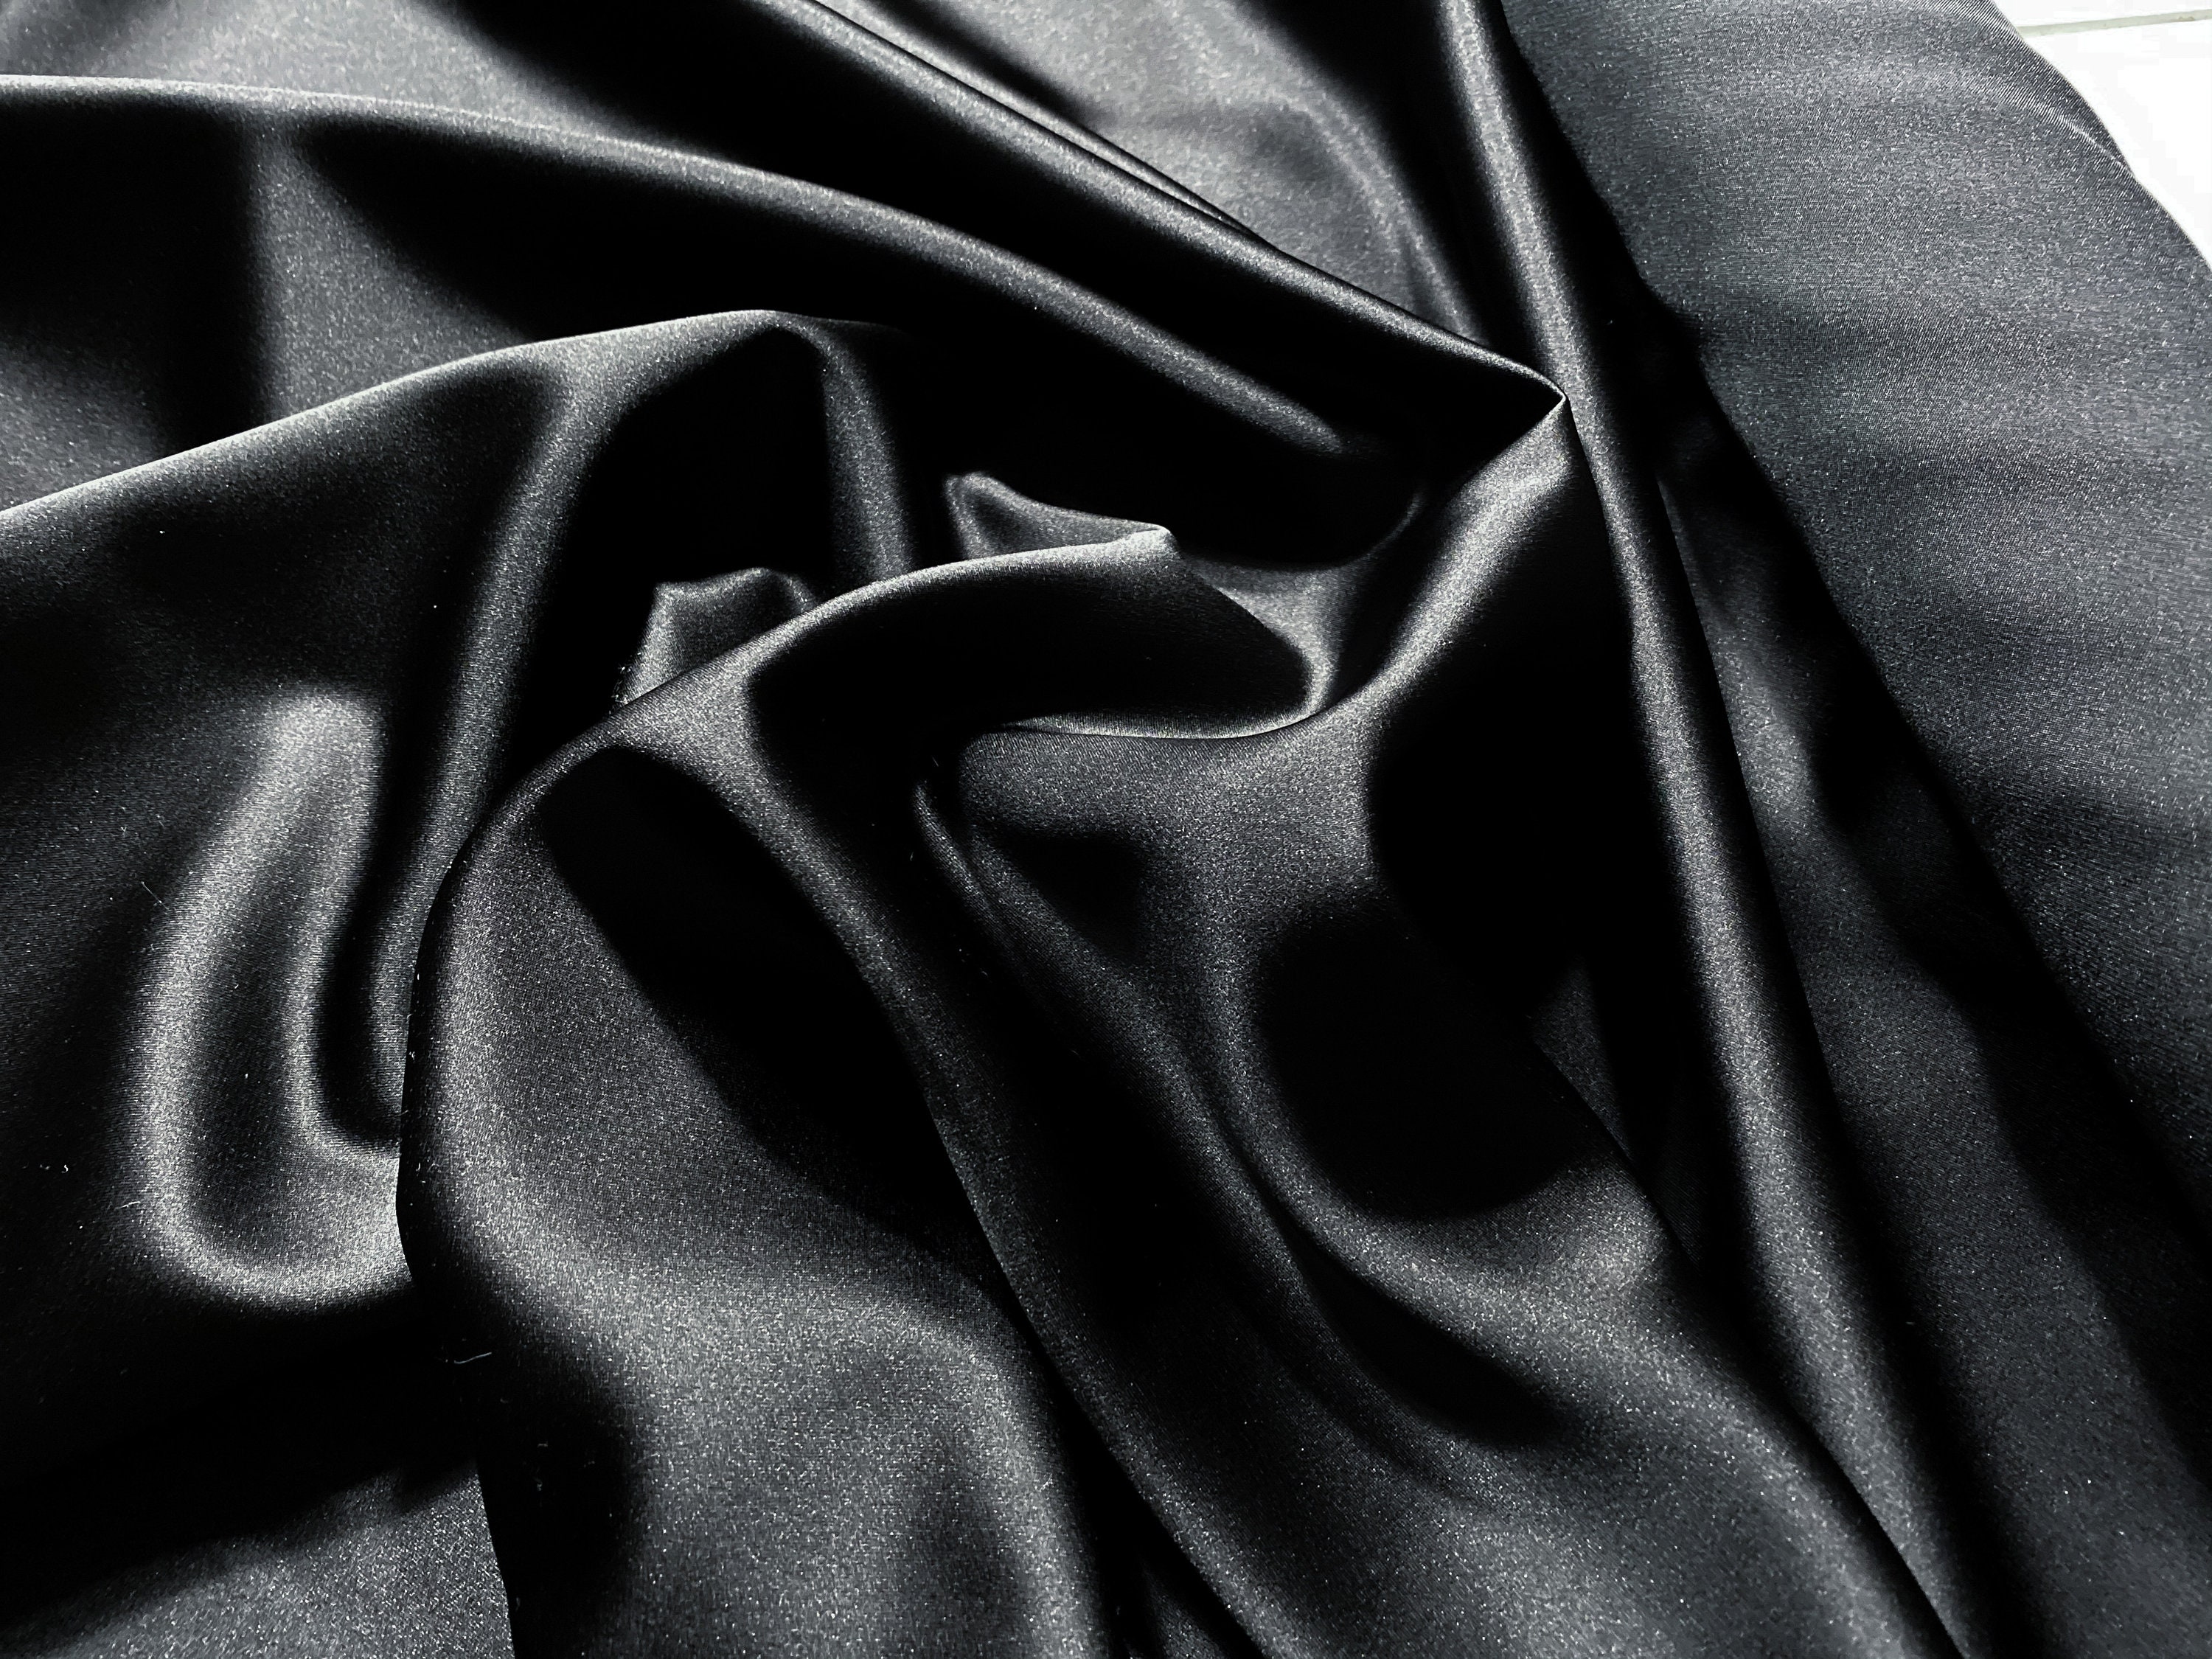 50 PIECE Black Satin Suiting Great Weight Solid Black Lustrous Formal  Couture Sleek Suiting Deadstock Apparel Fabric Remnant F0687 -  Canada